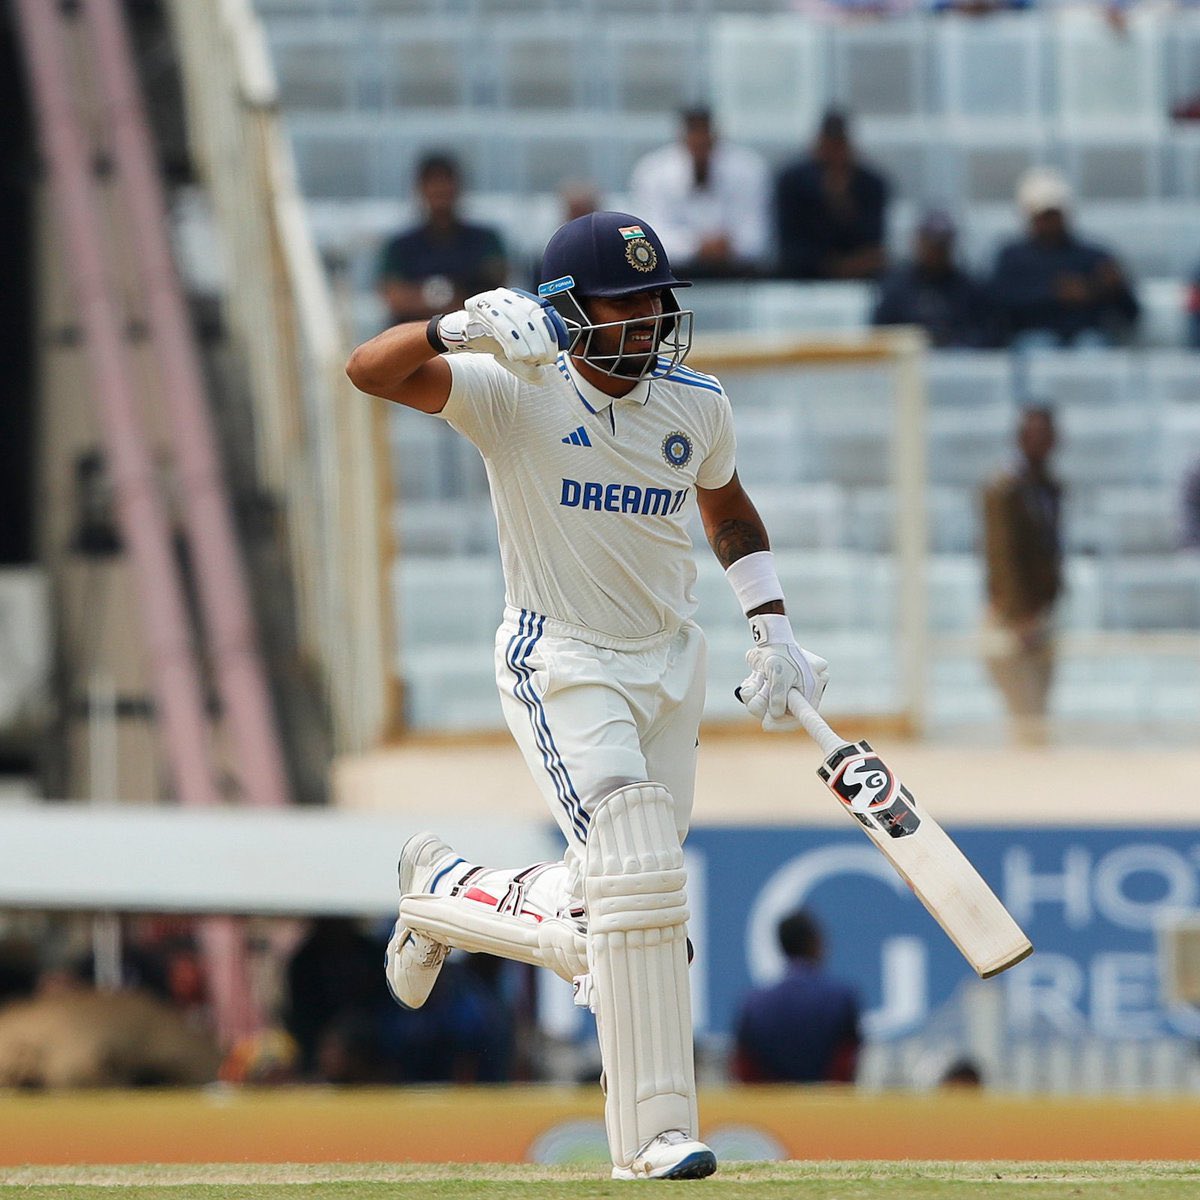 England - 353 (104.5)
India - 307 (103.2)
India Trail By 46 Runs.

Lunch 🕰️ 

 #IndiaVsEngland #IndiaVsEngland #IndiaVsEnglandTest #EnglandVsIndia